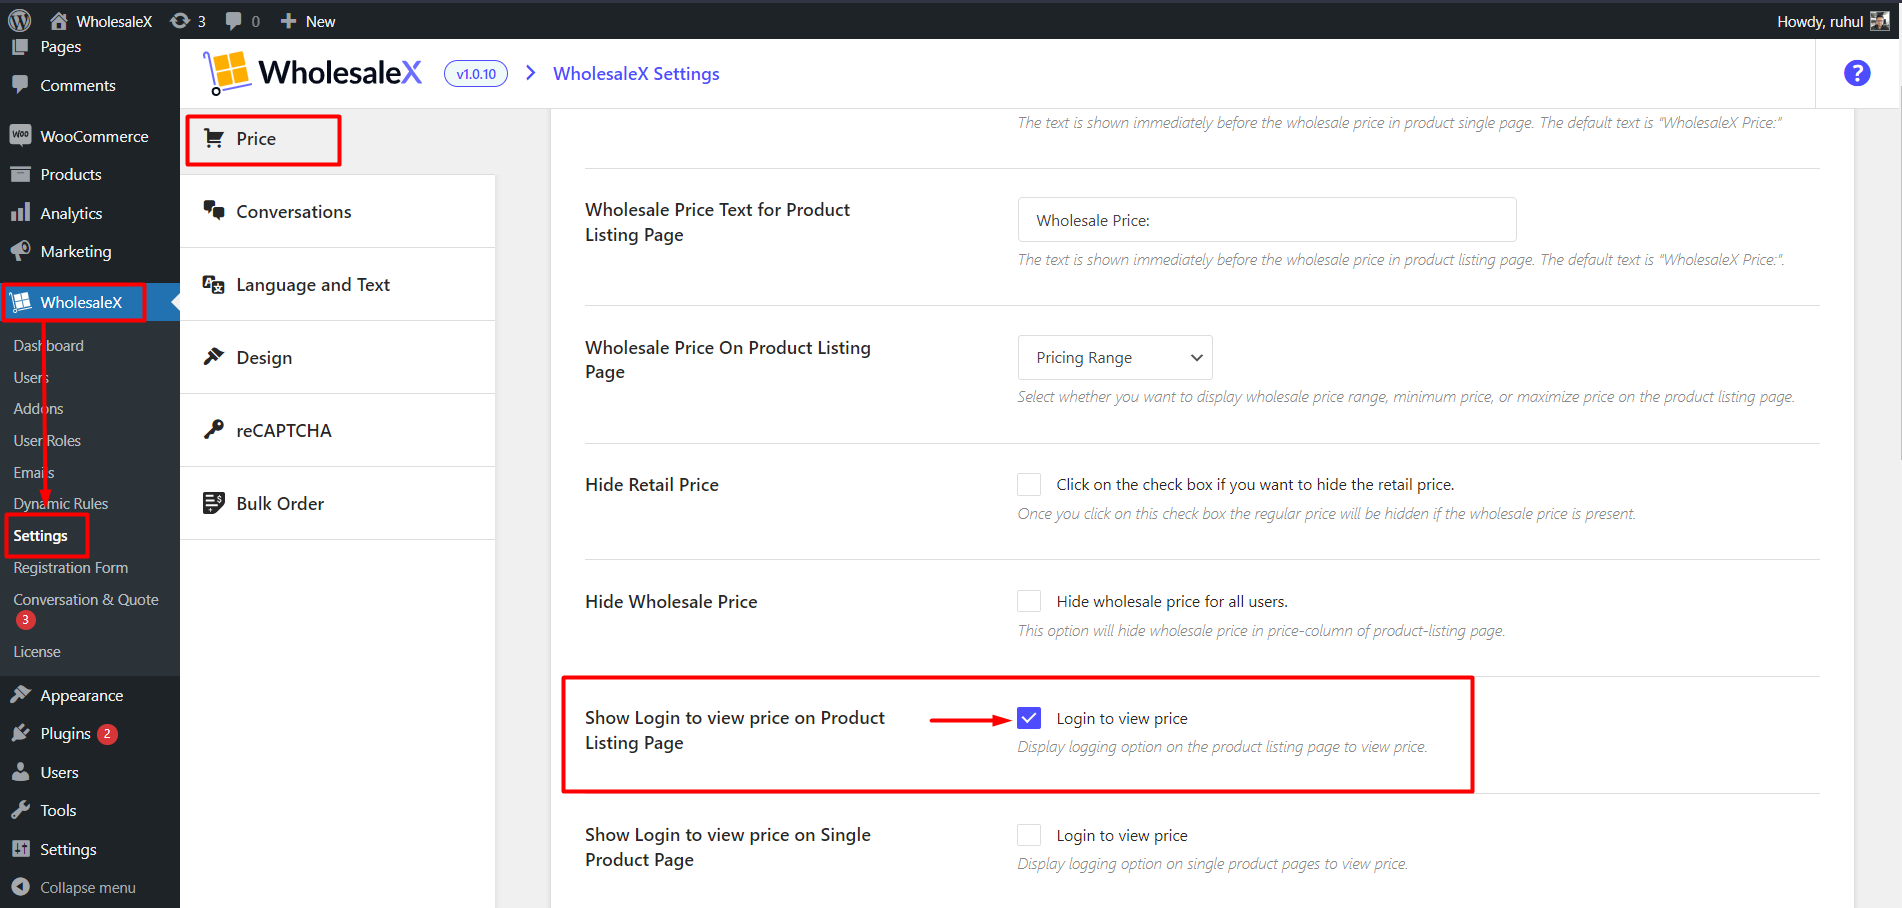 WholesaleX Enabling Login to View Price on Product Listing Page